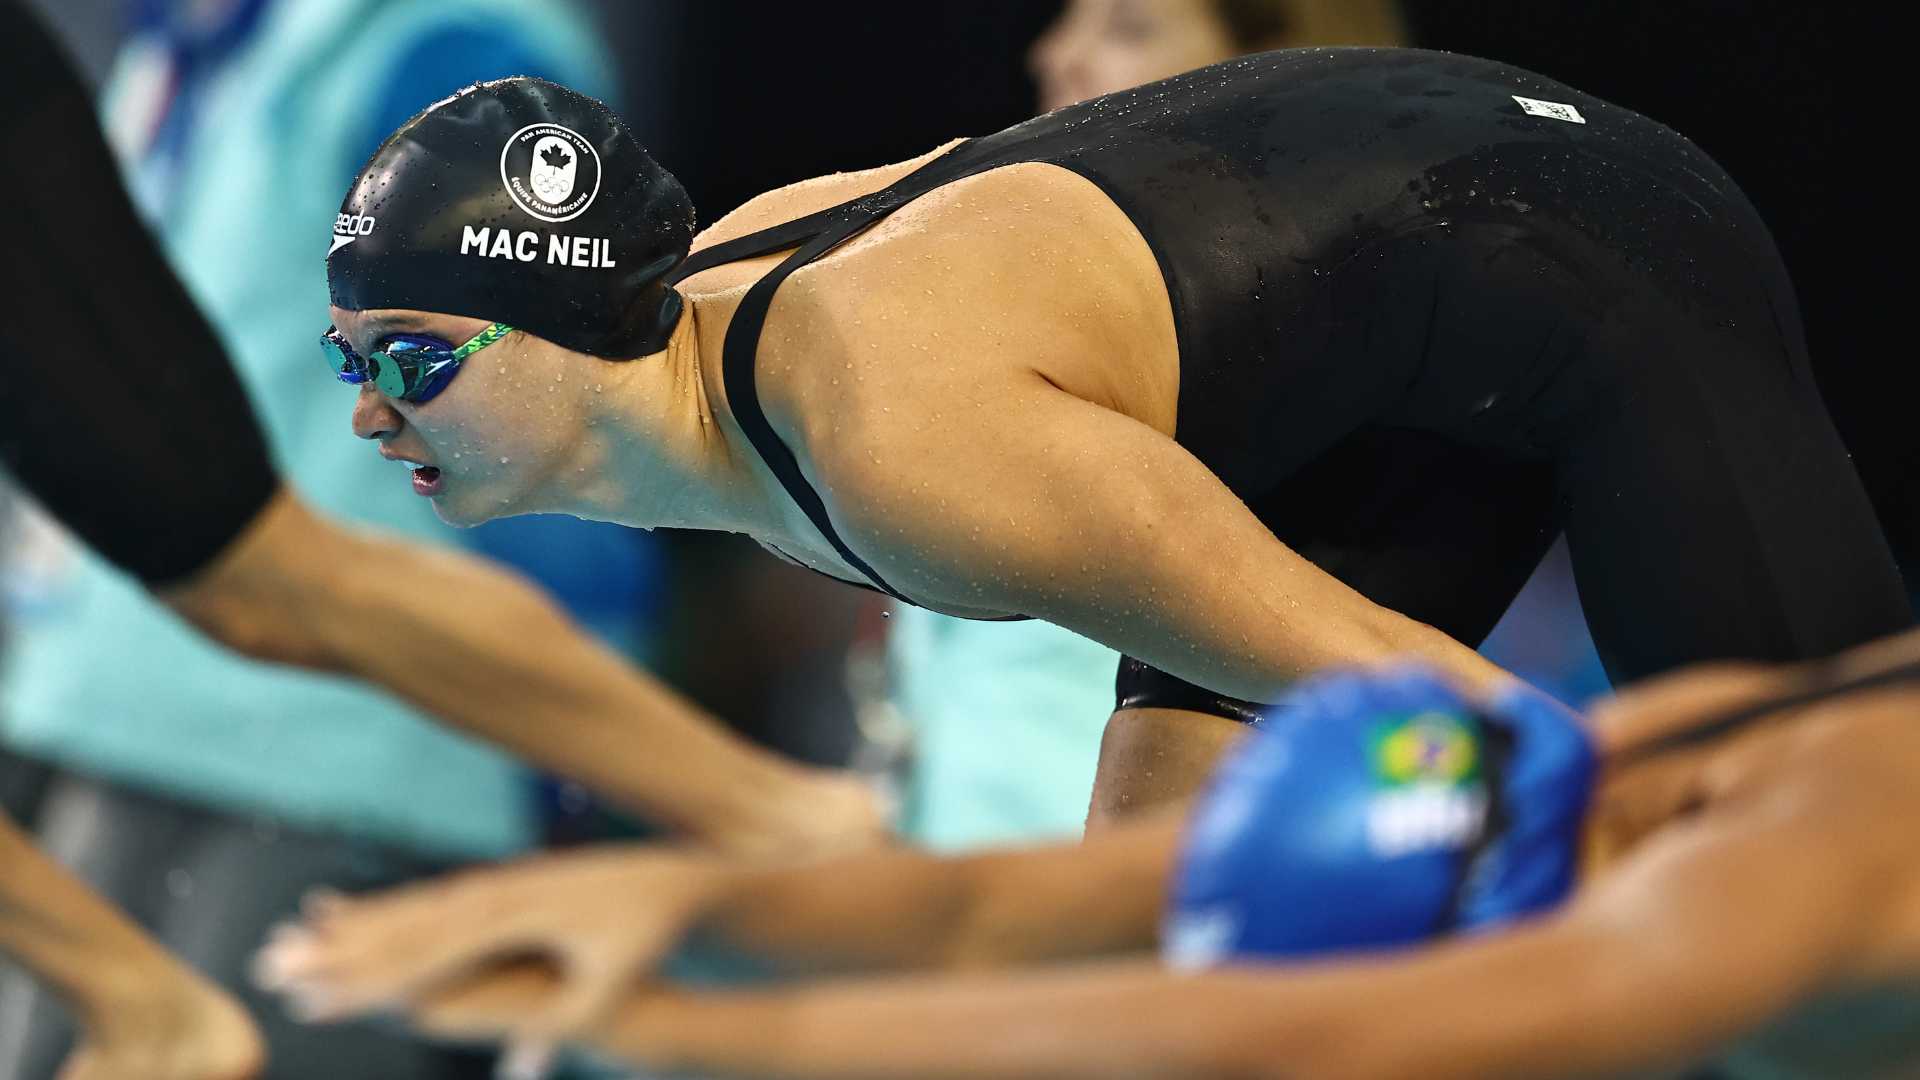 Canadian McNeil qualifies fourth for the 100m butterfly final